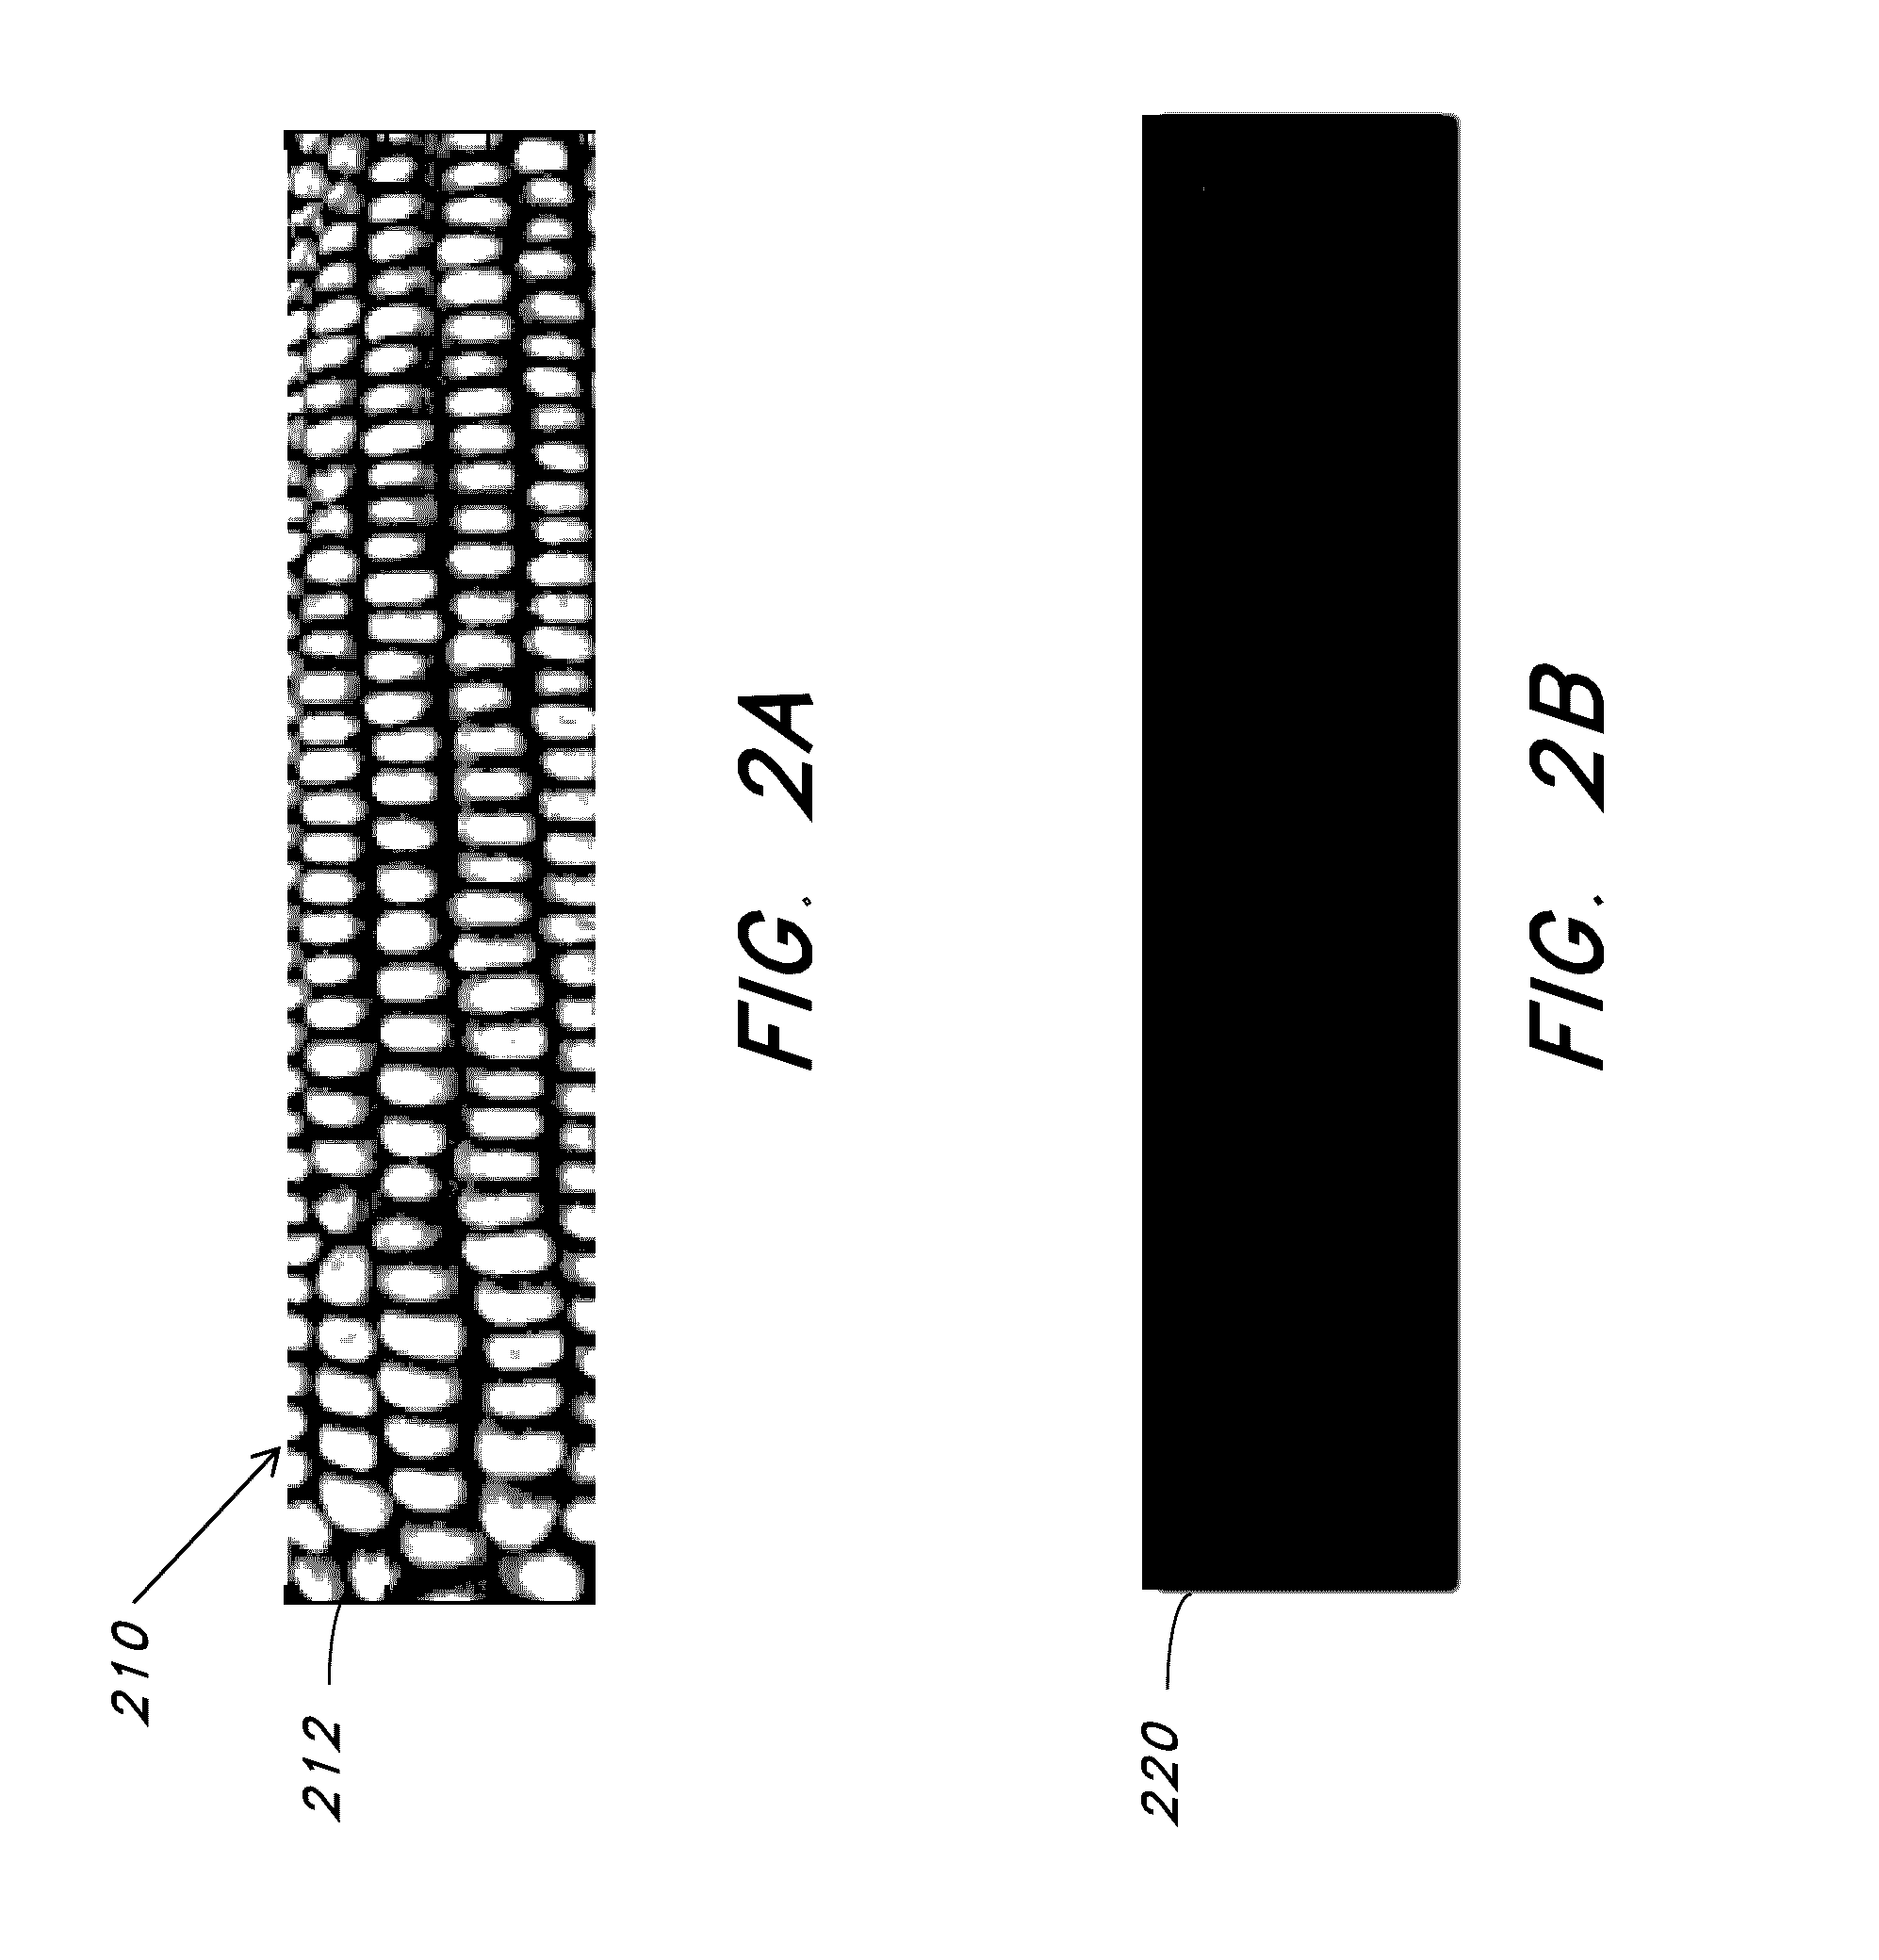 Apparatus and processes for corn moisture analysis and prediction of optimum harvest date